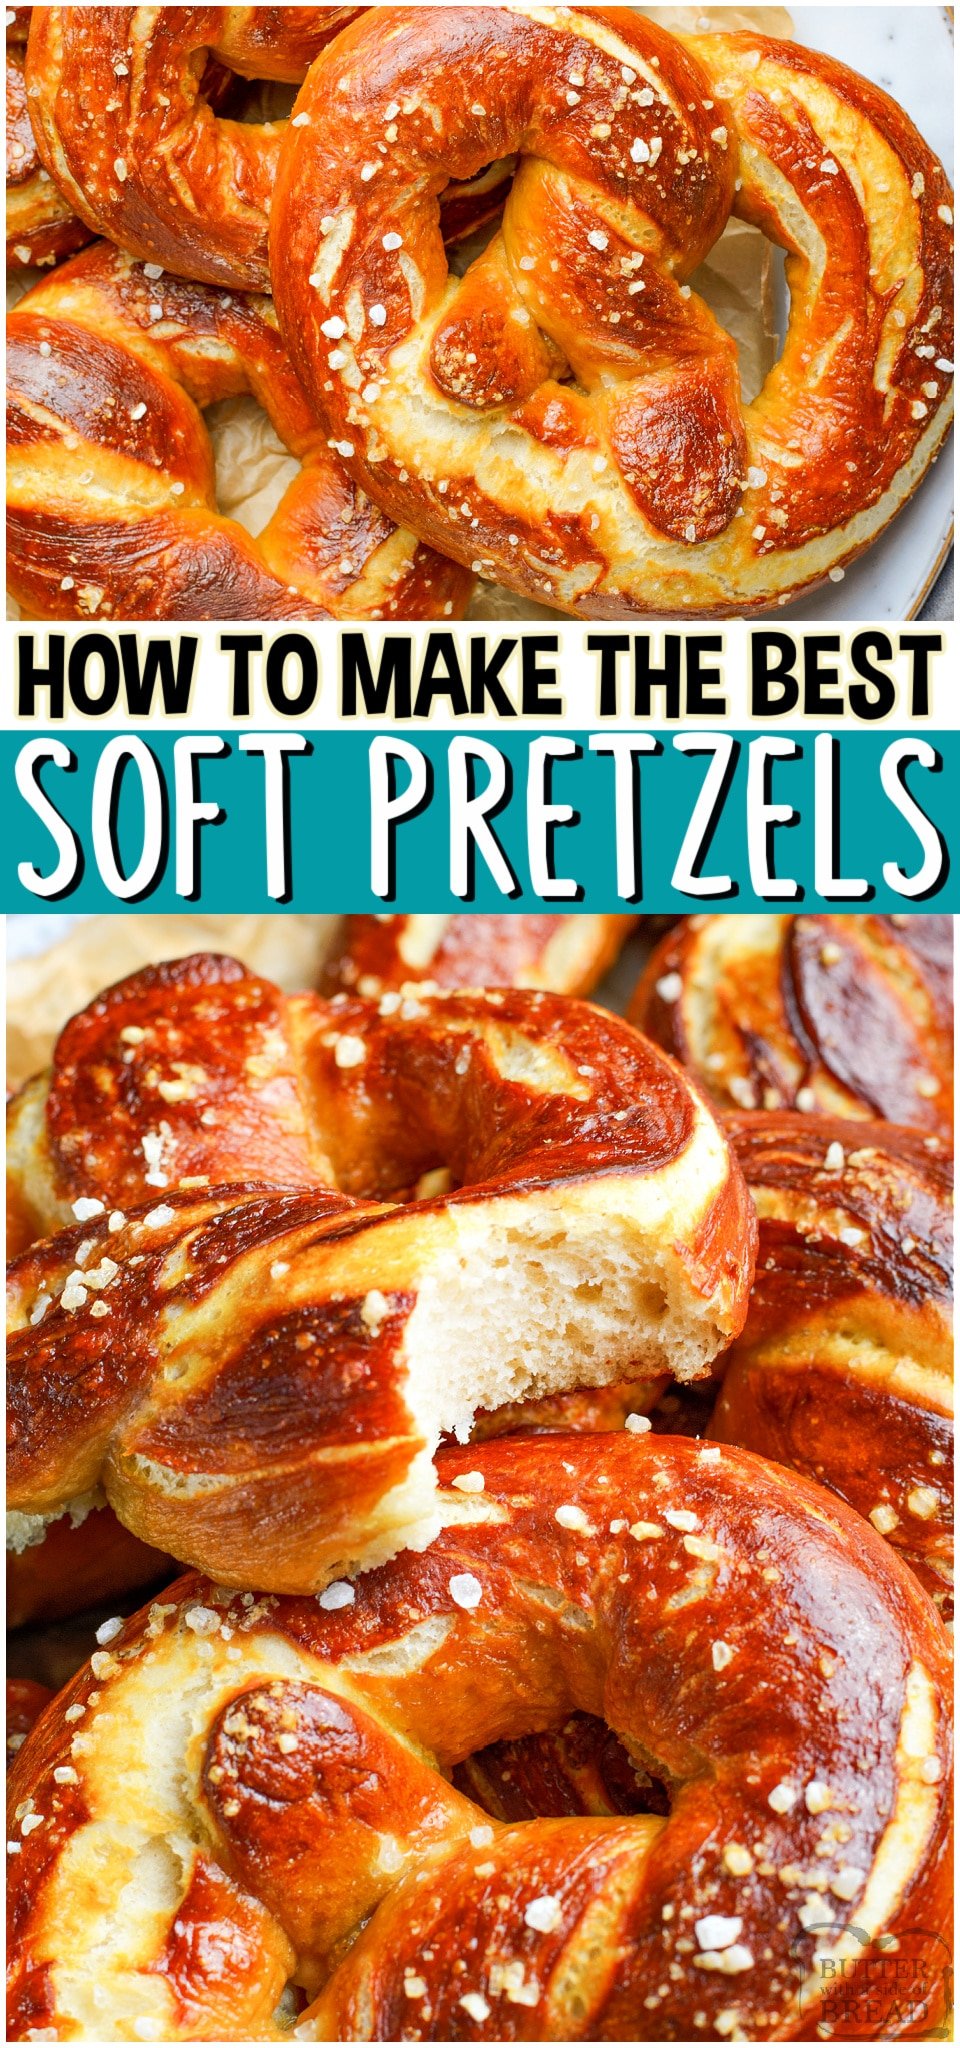 Homemade Soft Pretzels recipe made with pantry ingredients & SO delicious! Step-by-step instructions for how to make soft pretzels and an easy cheese sauce to dip!